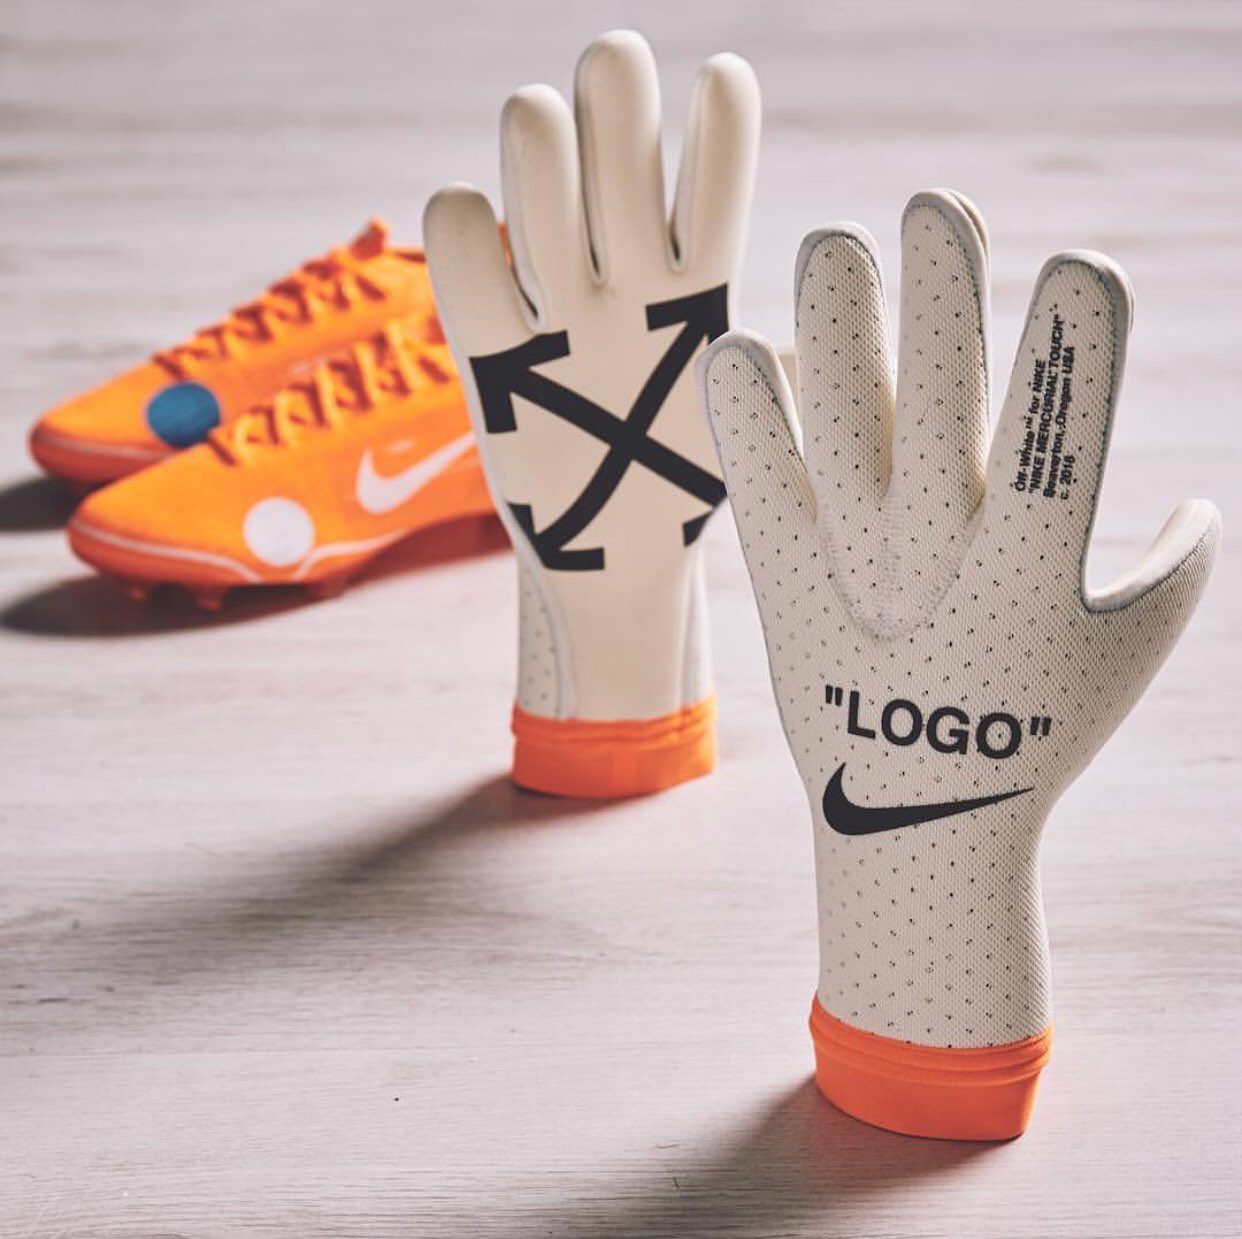 Encantador transferencia de dinero Escabullirse Pro:Direct Soccer Twitterren: "Virgil x Nike collab once again to produce  the Off-White Mercurial Touch Elite glove. What do you think? Check out  @ProD_Keepers for a closer look and all things goalkeeping